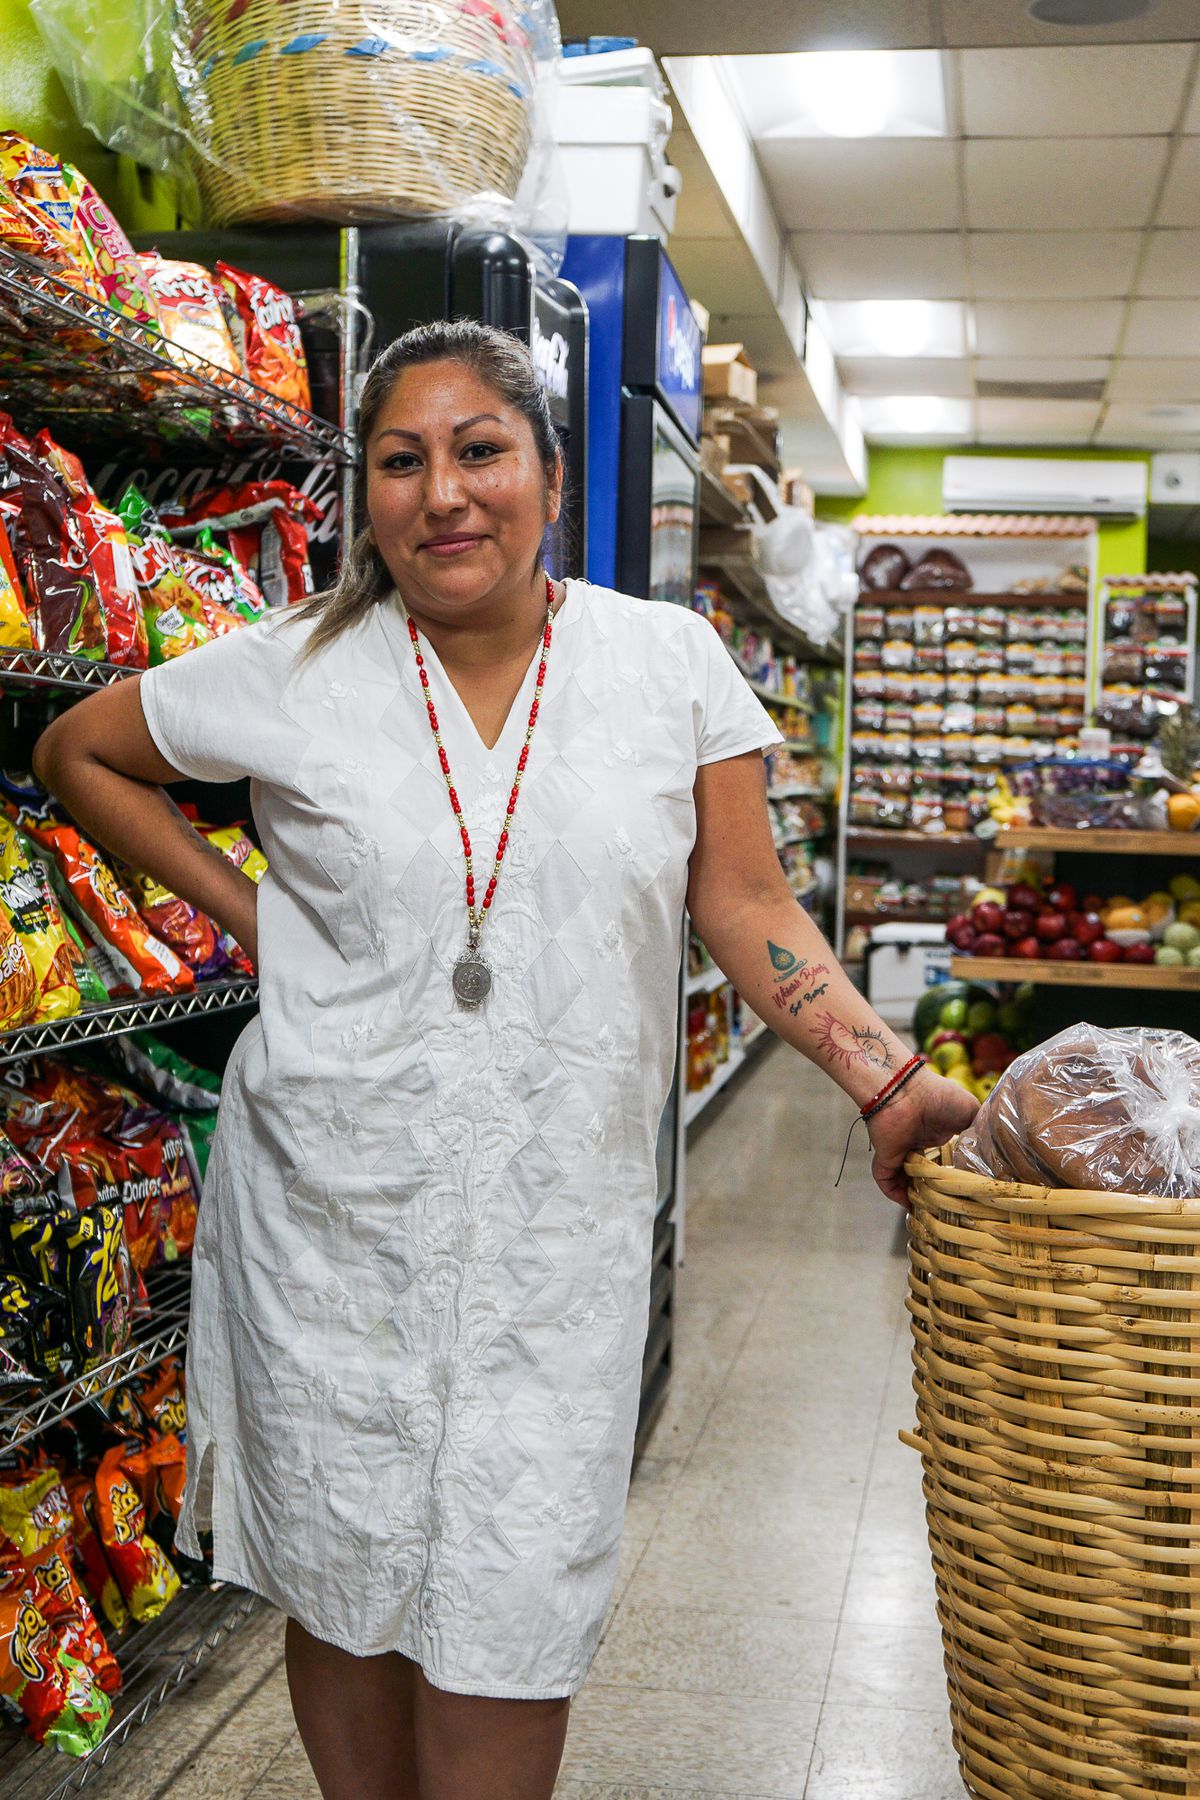 A Oaxacan woman wears a white gown a stands inside her store.